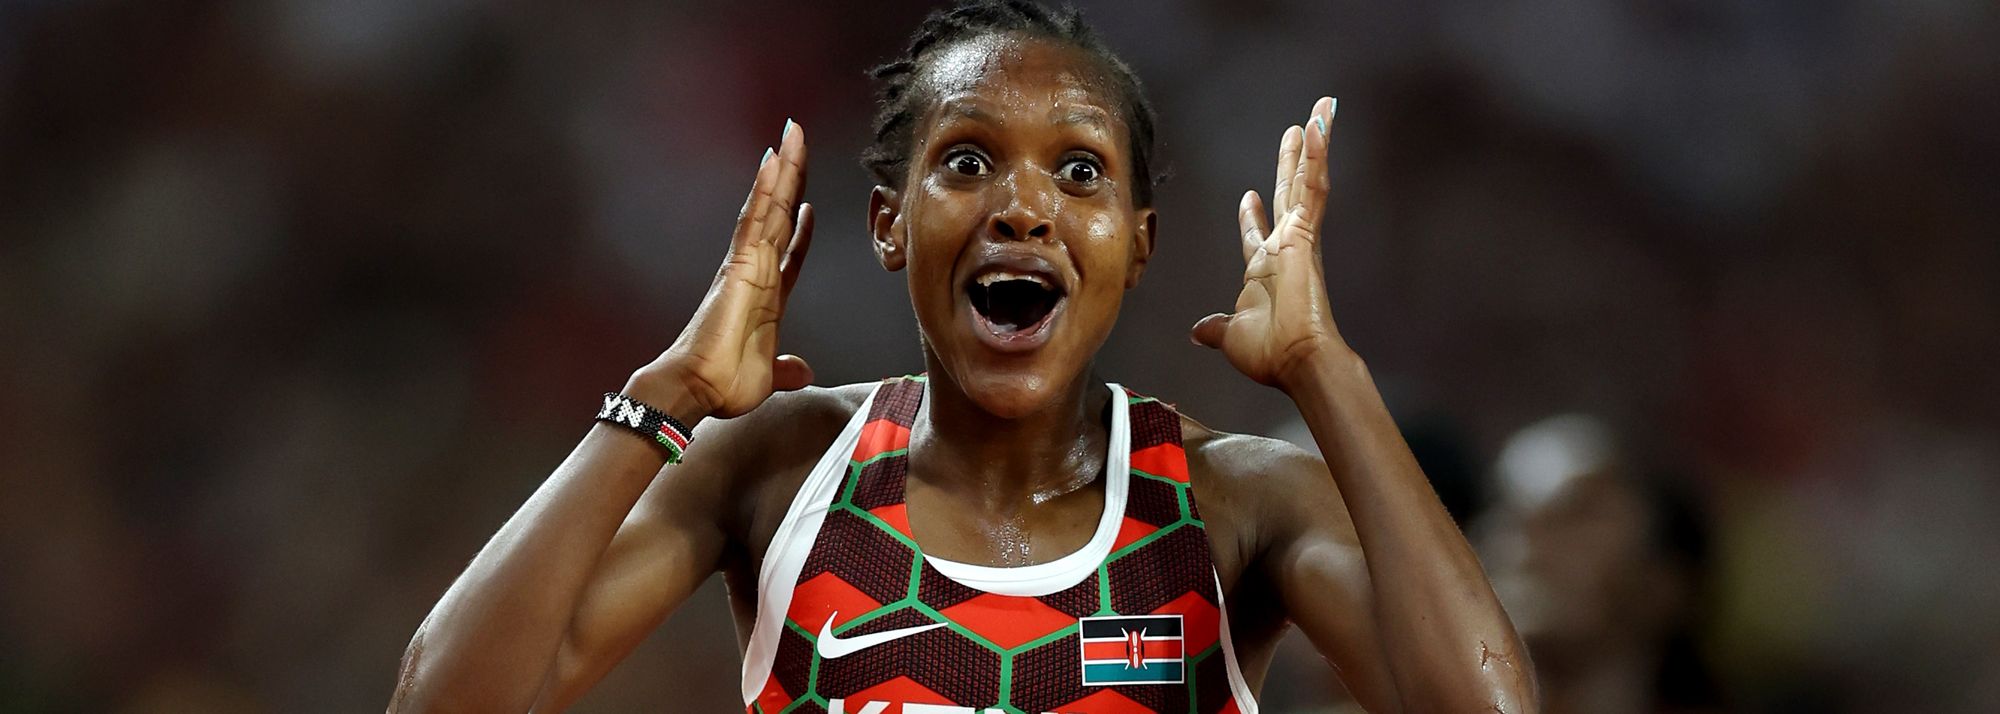 With 250m remaining of the women’s 5000m final at the World Athletics Championships Budapest 23, Faith Kipyegon had a trio of distinguished rivals hot on her heels